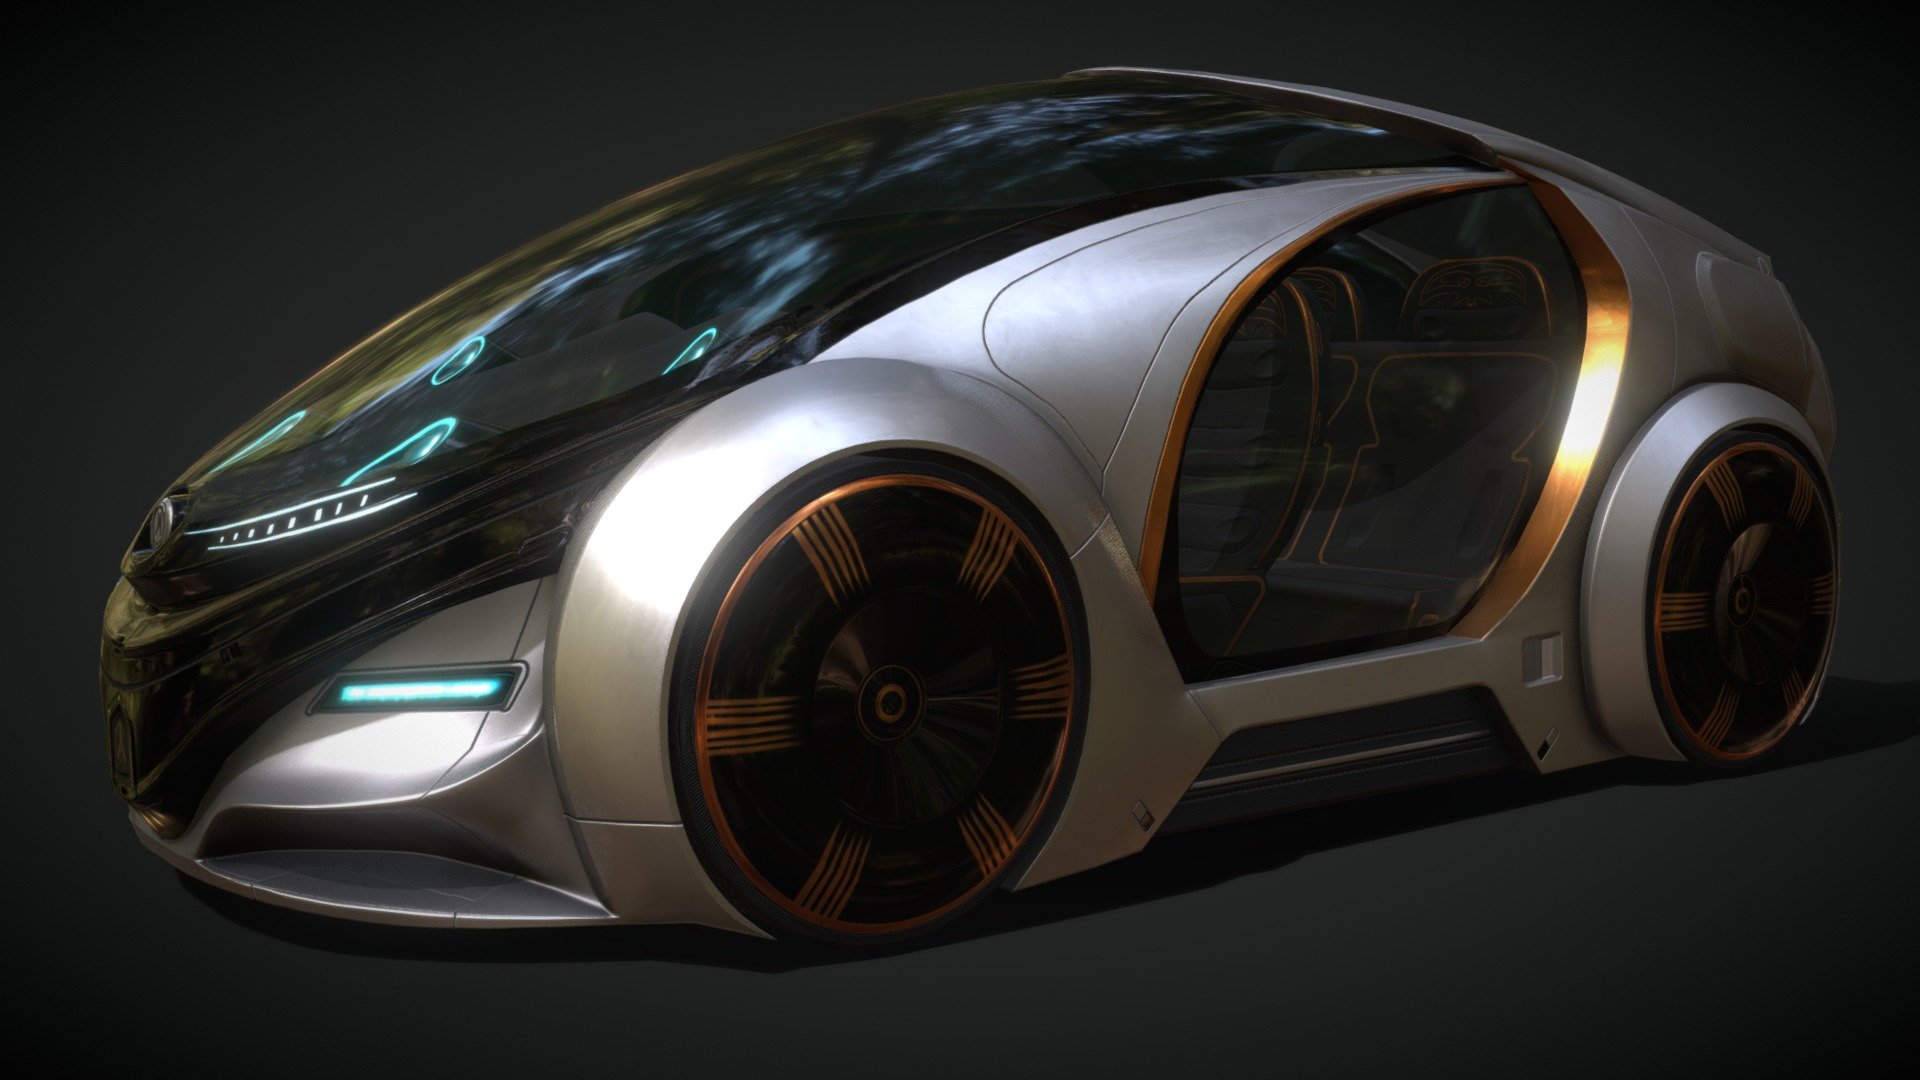 This futuristic CAR n°3 was designed in optimized 3D, baked from a highpoly car with optimized UVs and a rich normal map. Ideal for populating a futuristic city, in a video game, or your personal projects. Enjoy ! - CAR 3 SCIFI (3Dpro) - 3D model by Herve3D 3d model